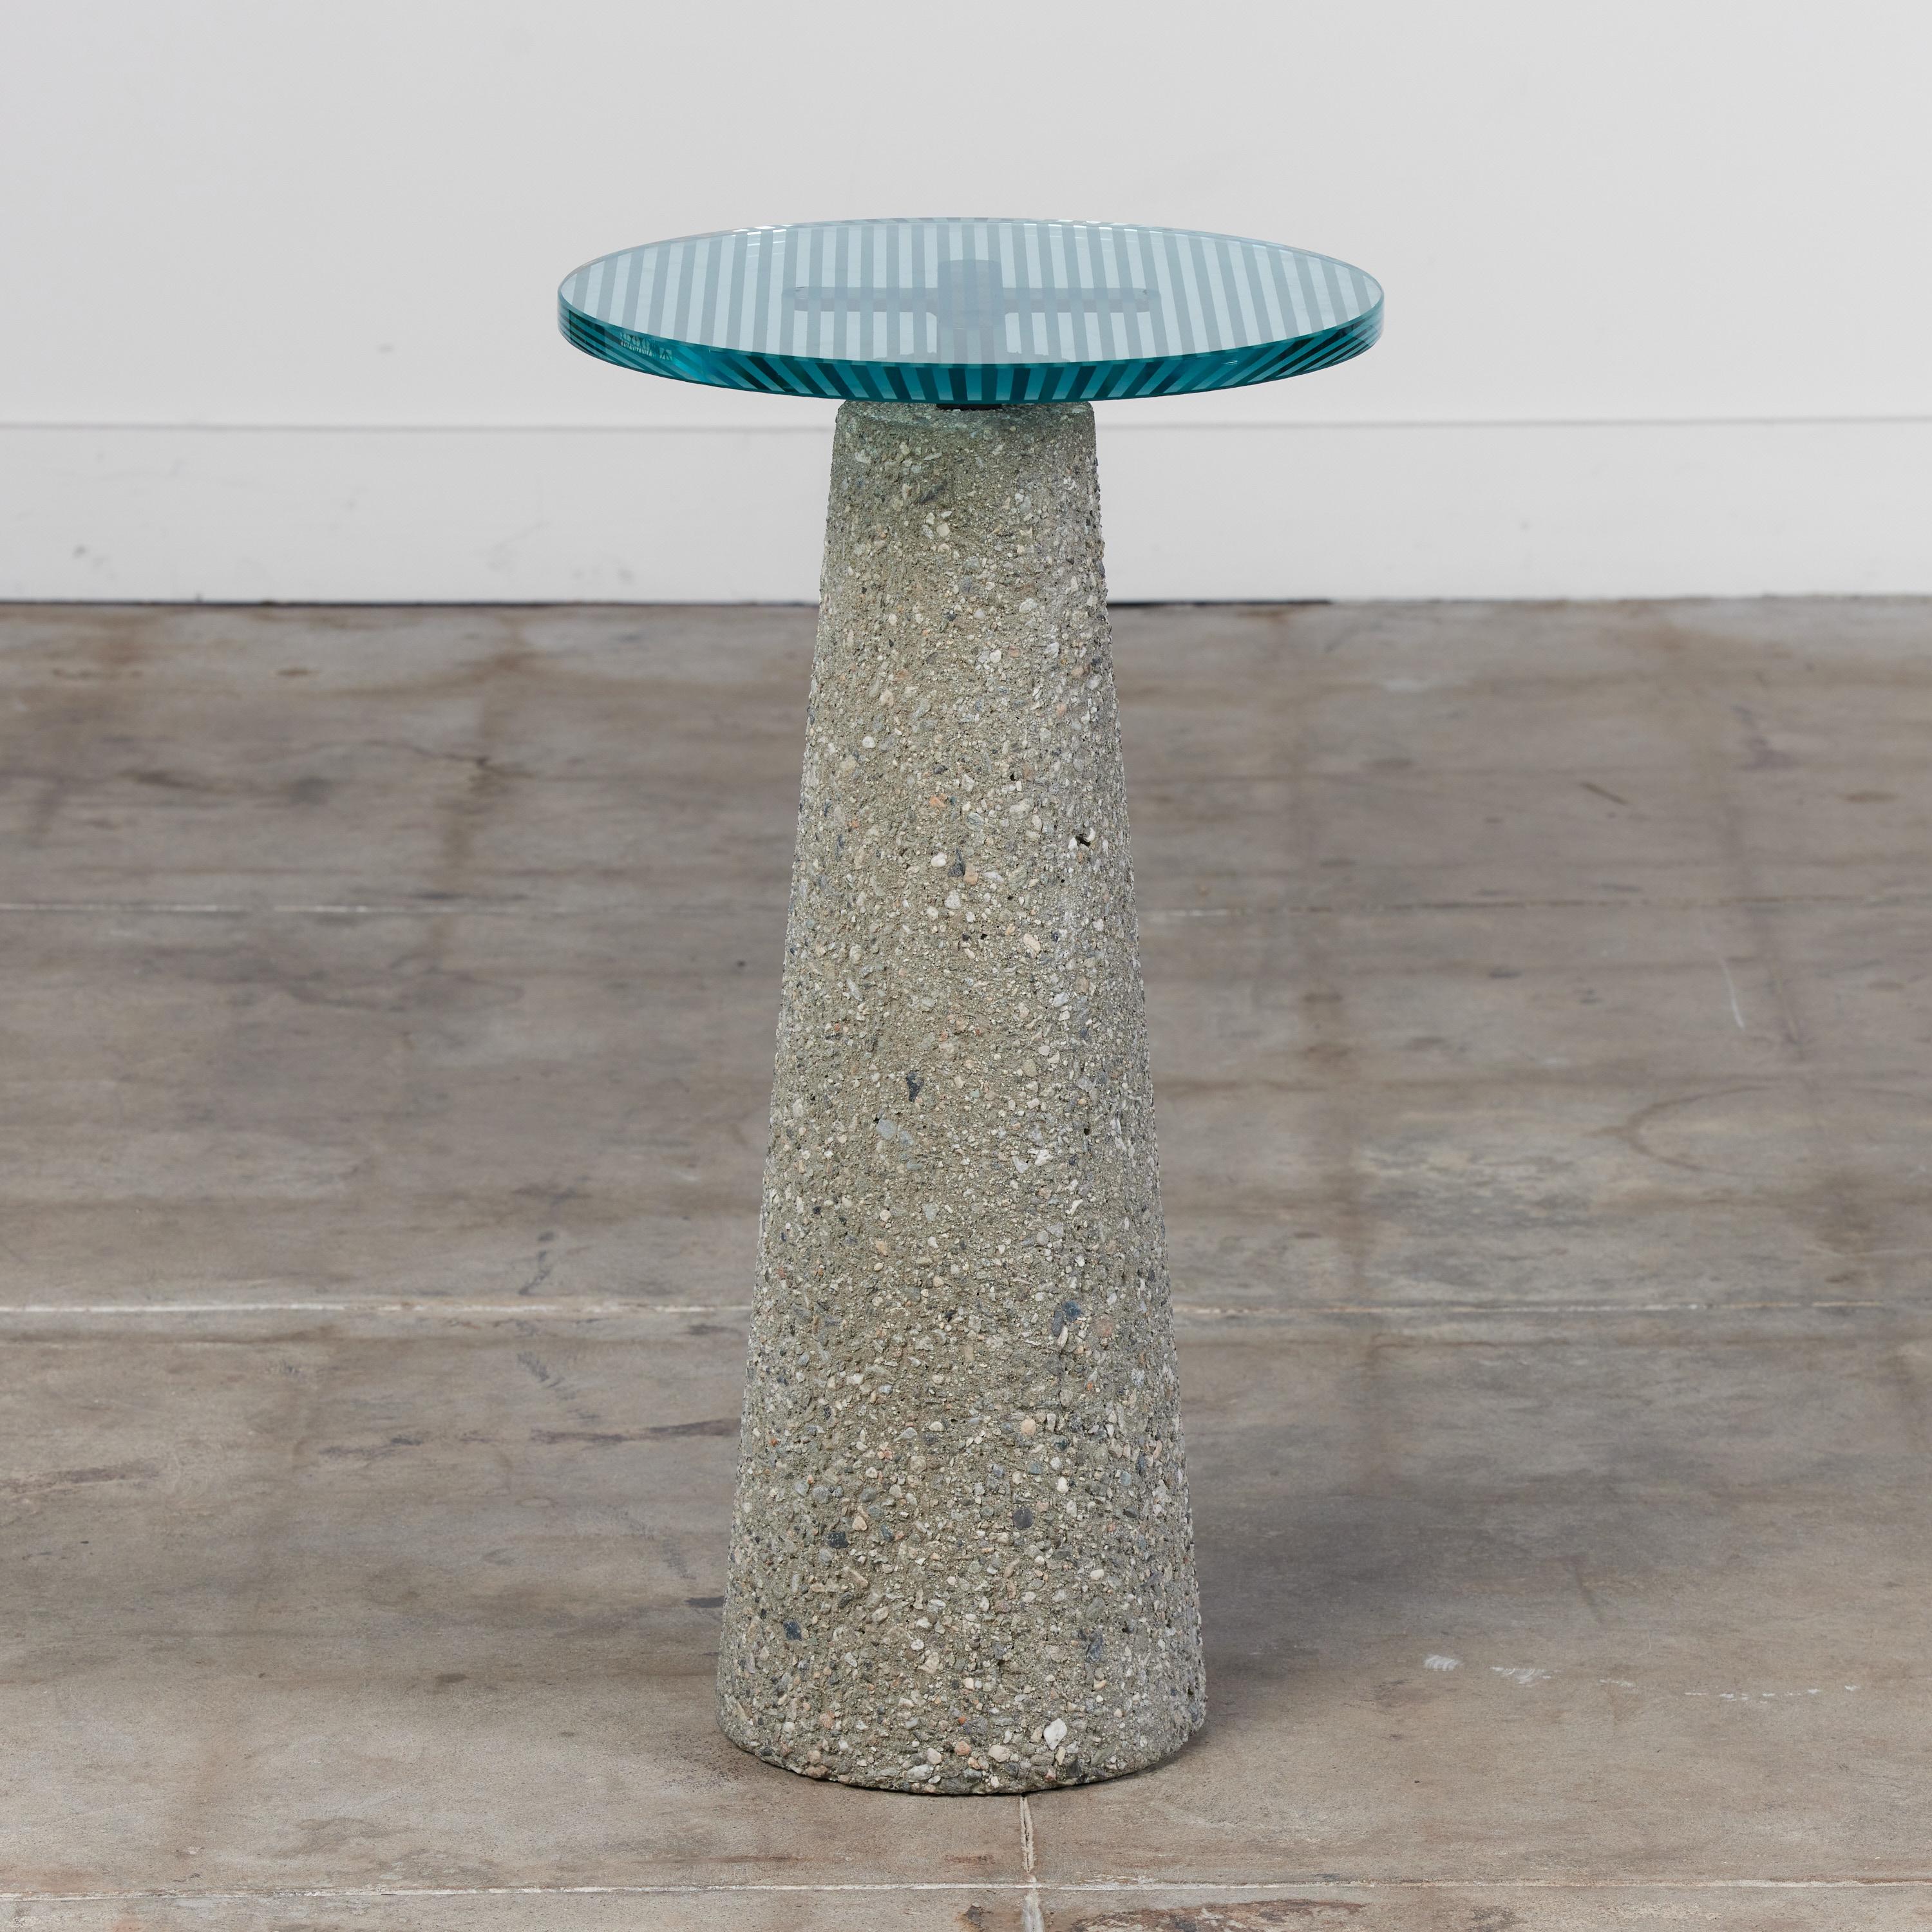 Pedestal by Geoffrey Frost c.1985, USA. This pedestal features an aggregate concrete tapered base with linear etched glass top. The round glass top is supported by a metal 